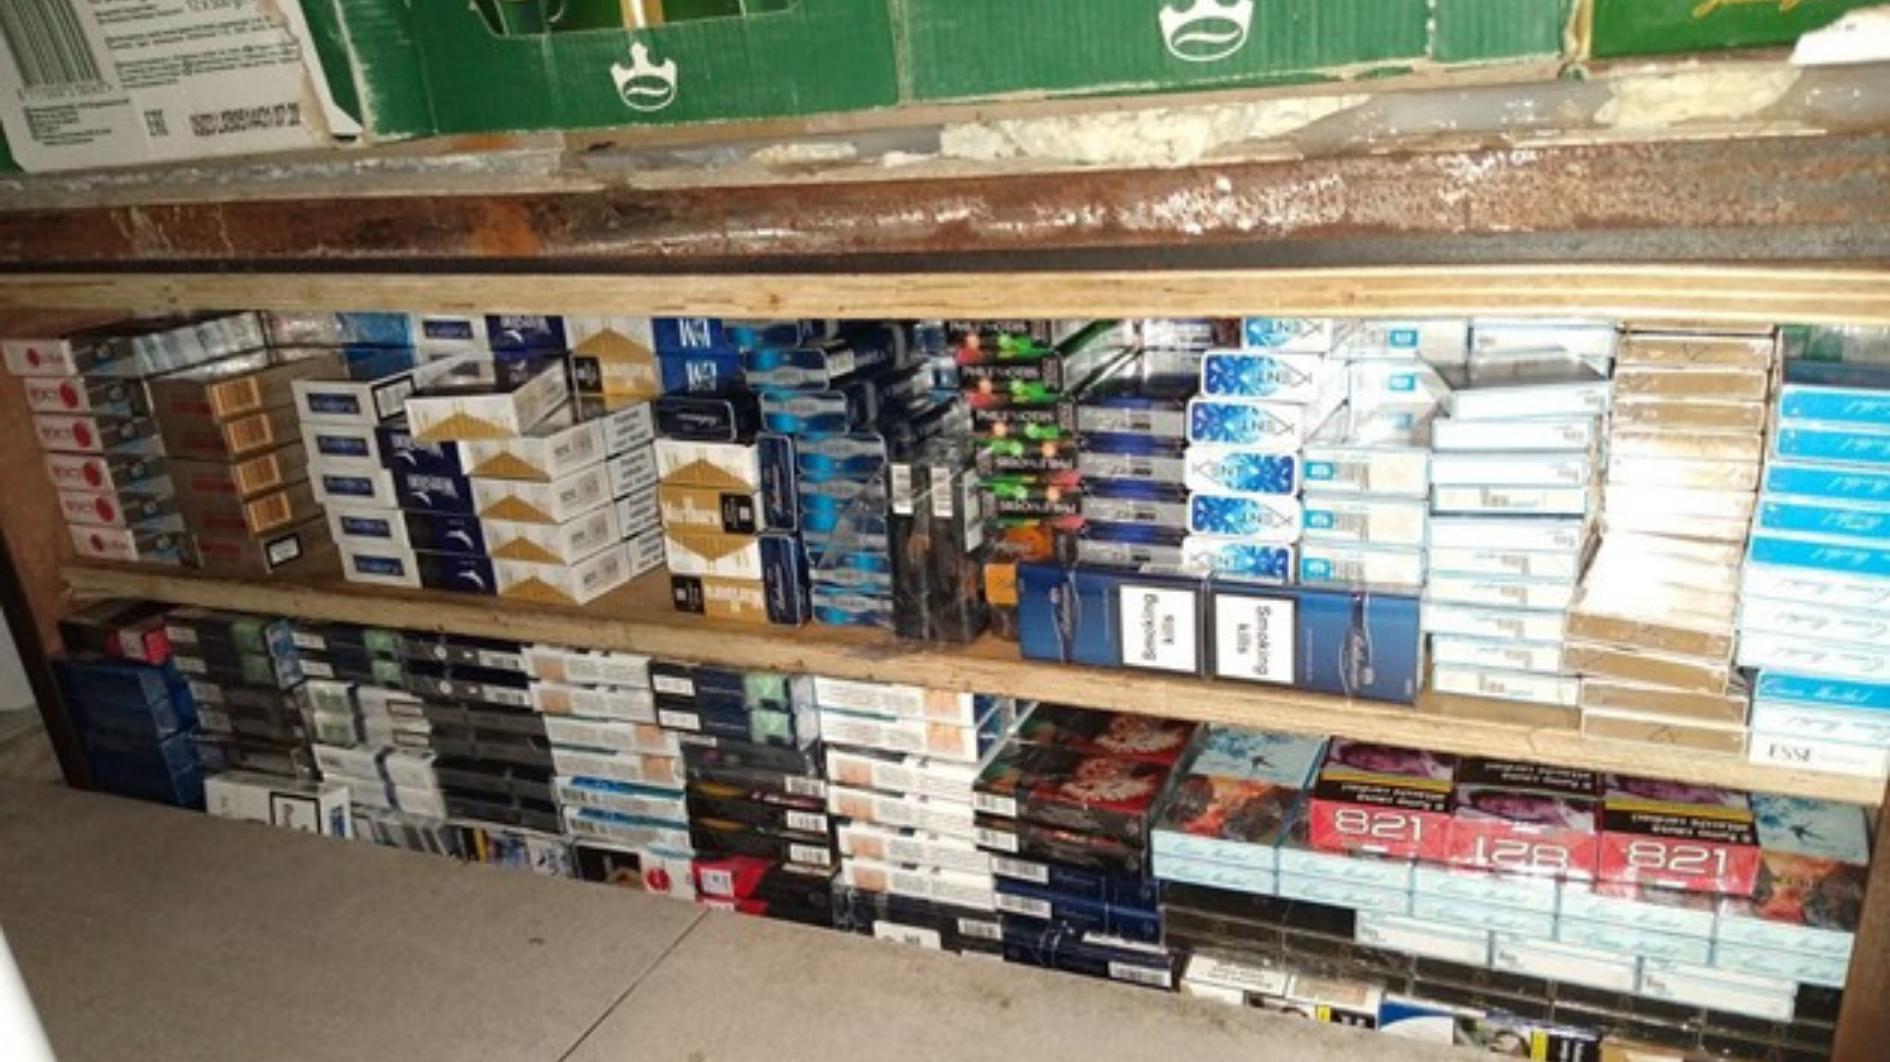 Remote controlled illegal cigarette stash exposed at Lincolnshire shop